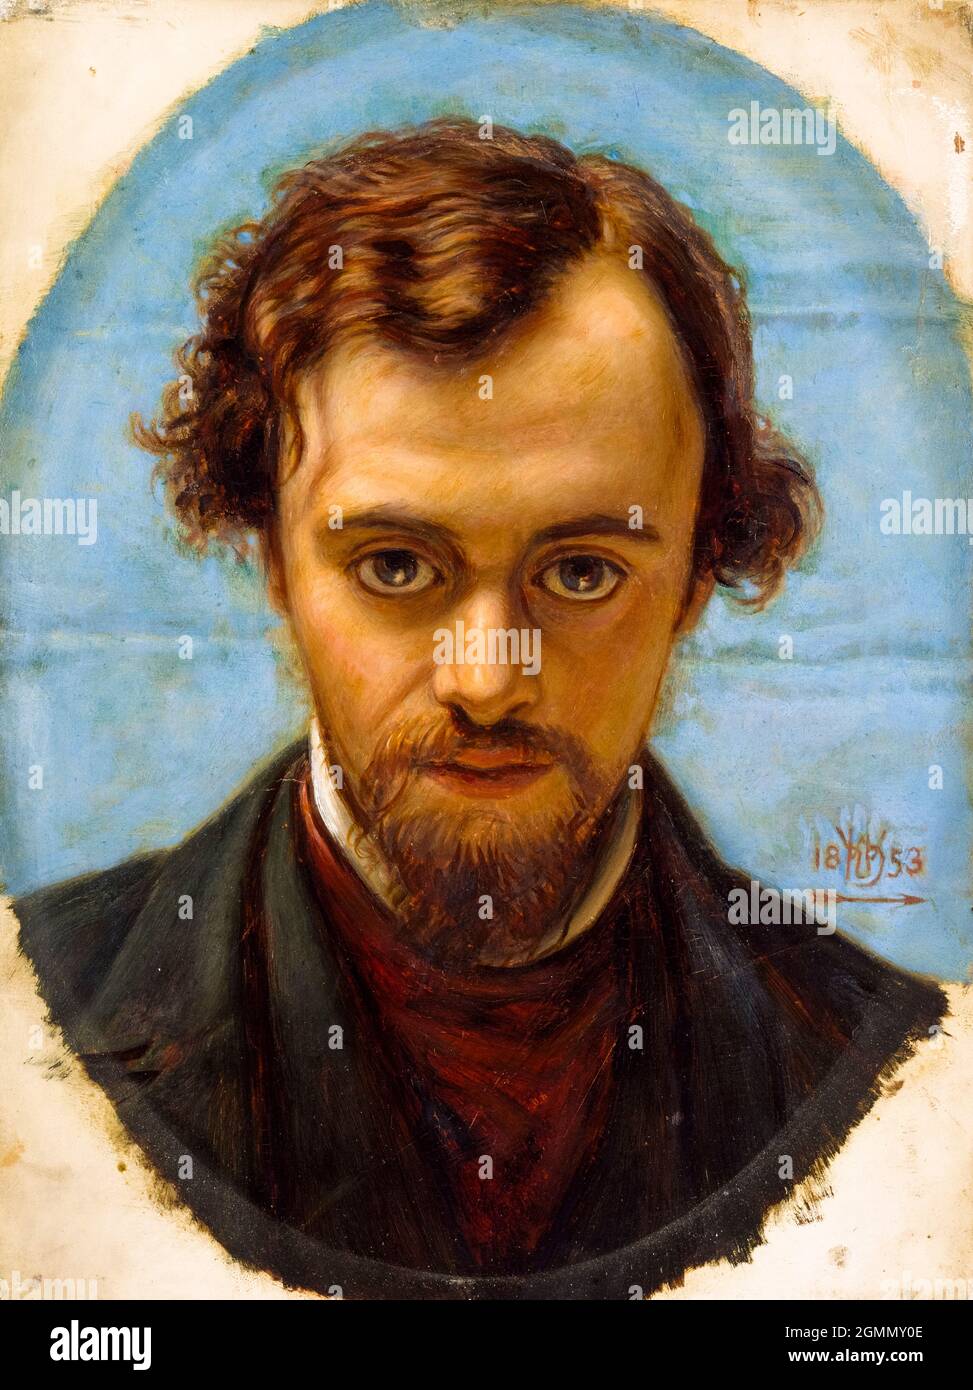 Dante Gabriel Rossetti (1828-1882), English poet, illustrator, painter and co-founder of the Pre-Raphaelite Brotherhood, portrait painting by William Holman Hunt, 1853 Stock Photo